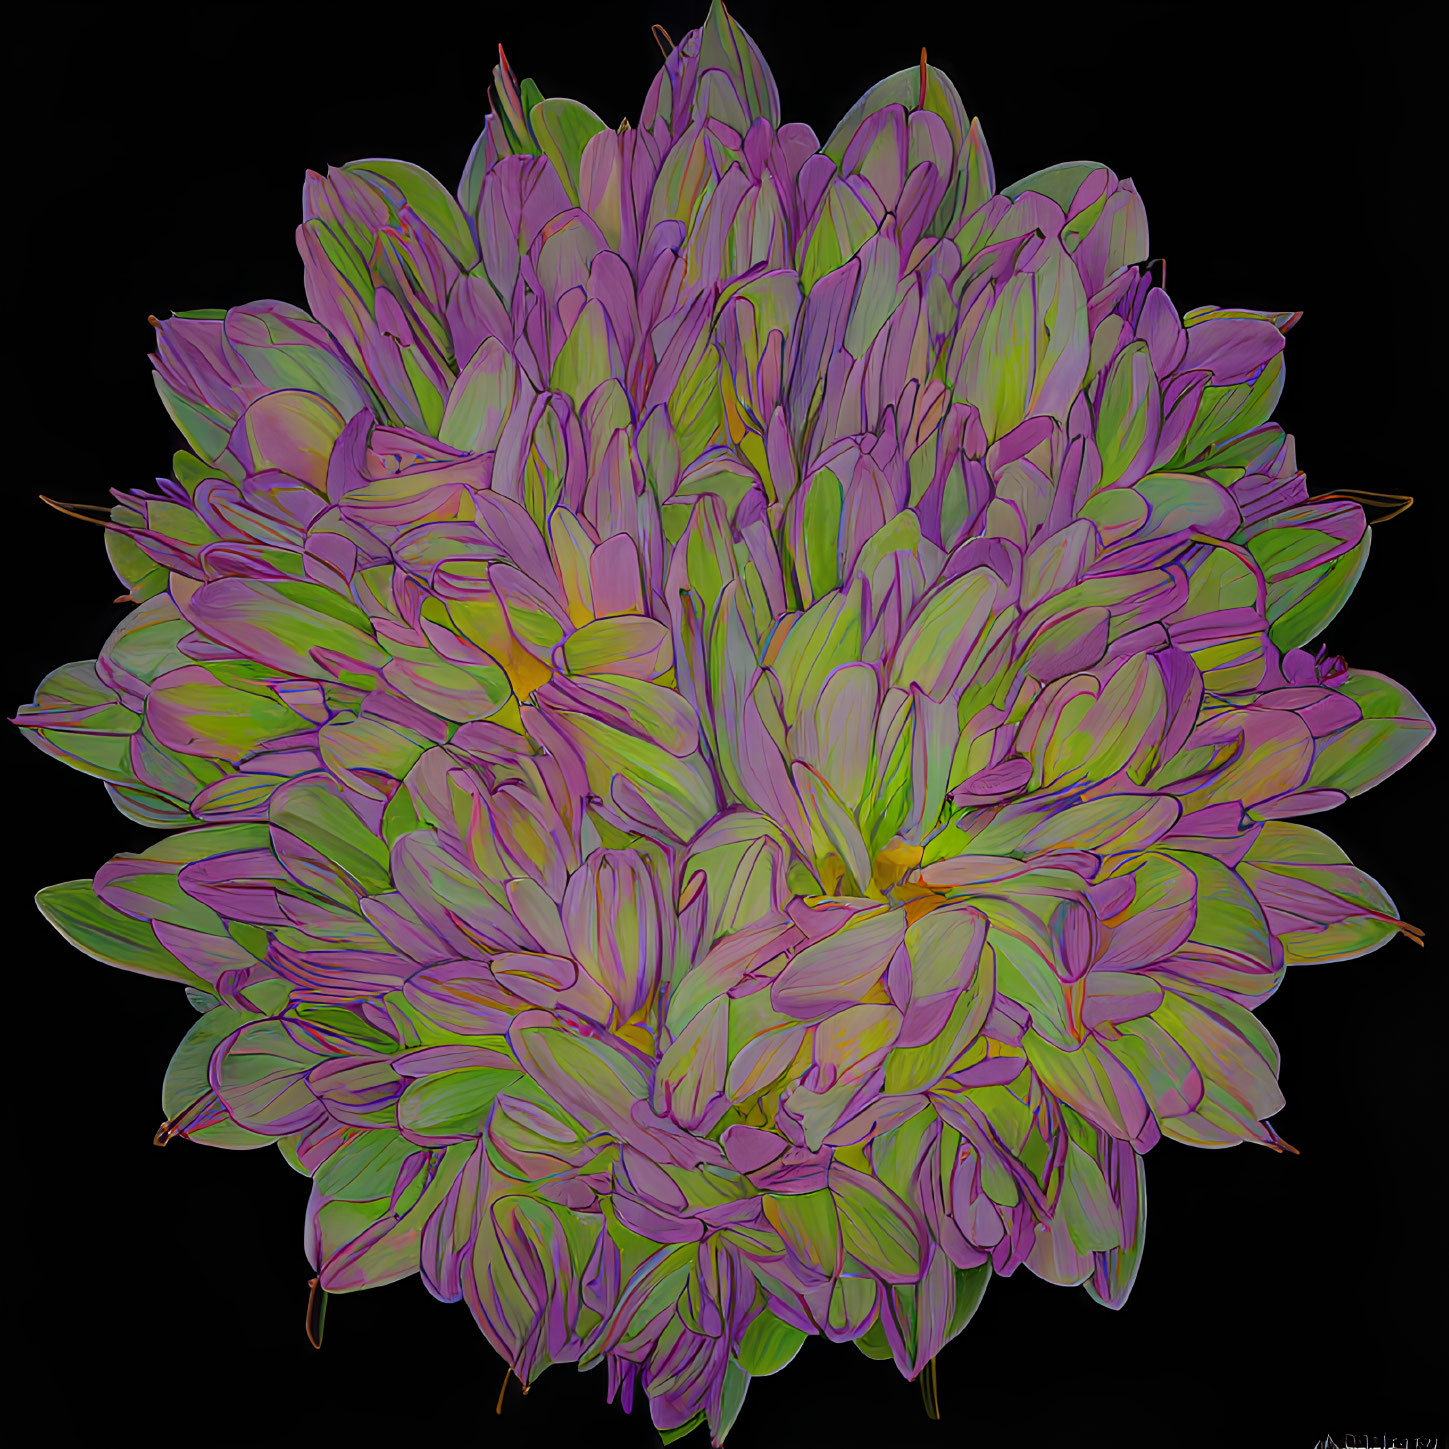 Symmetric floral digital art with purple, pink, and green petals on black.